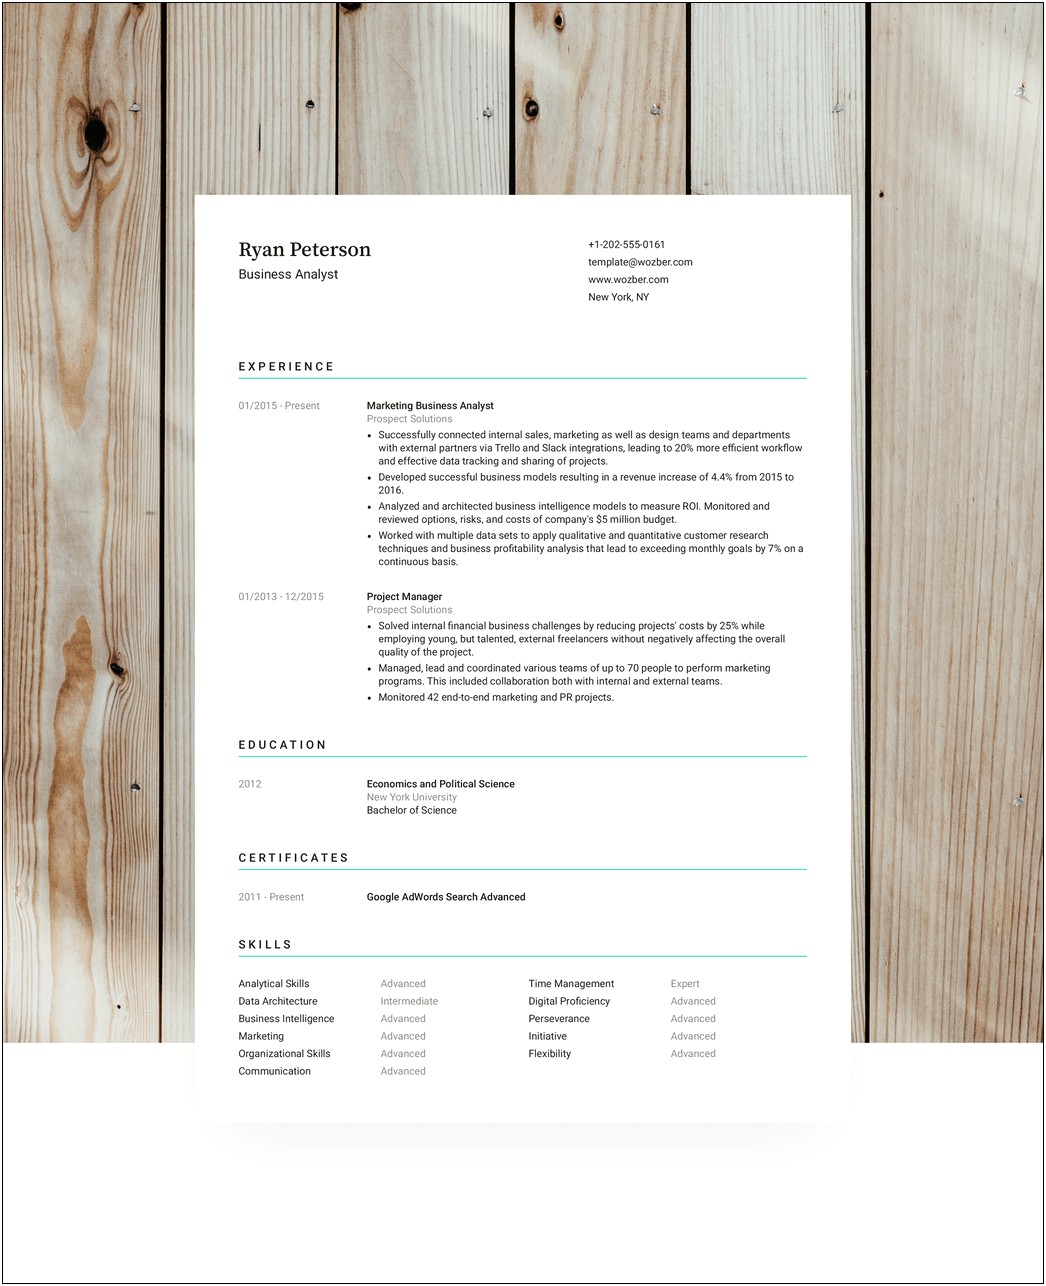 Review Resume With Applicant Tracking System Free